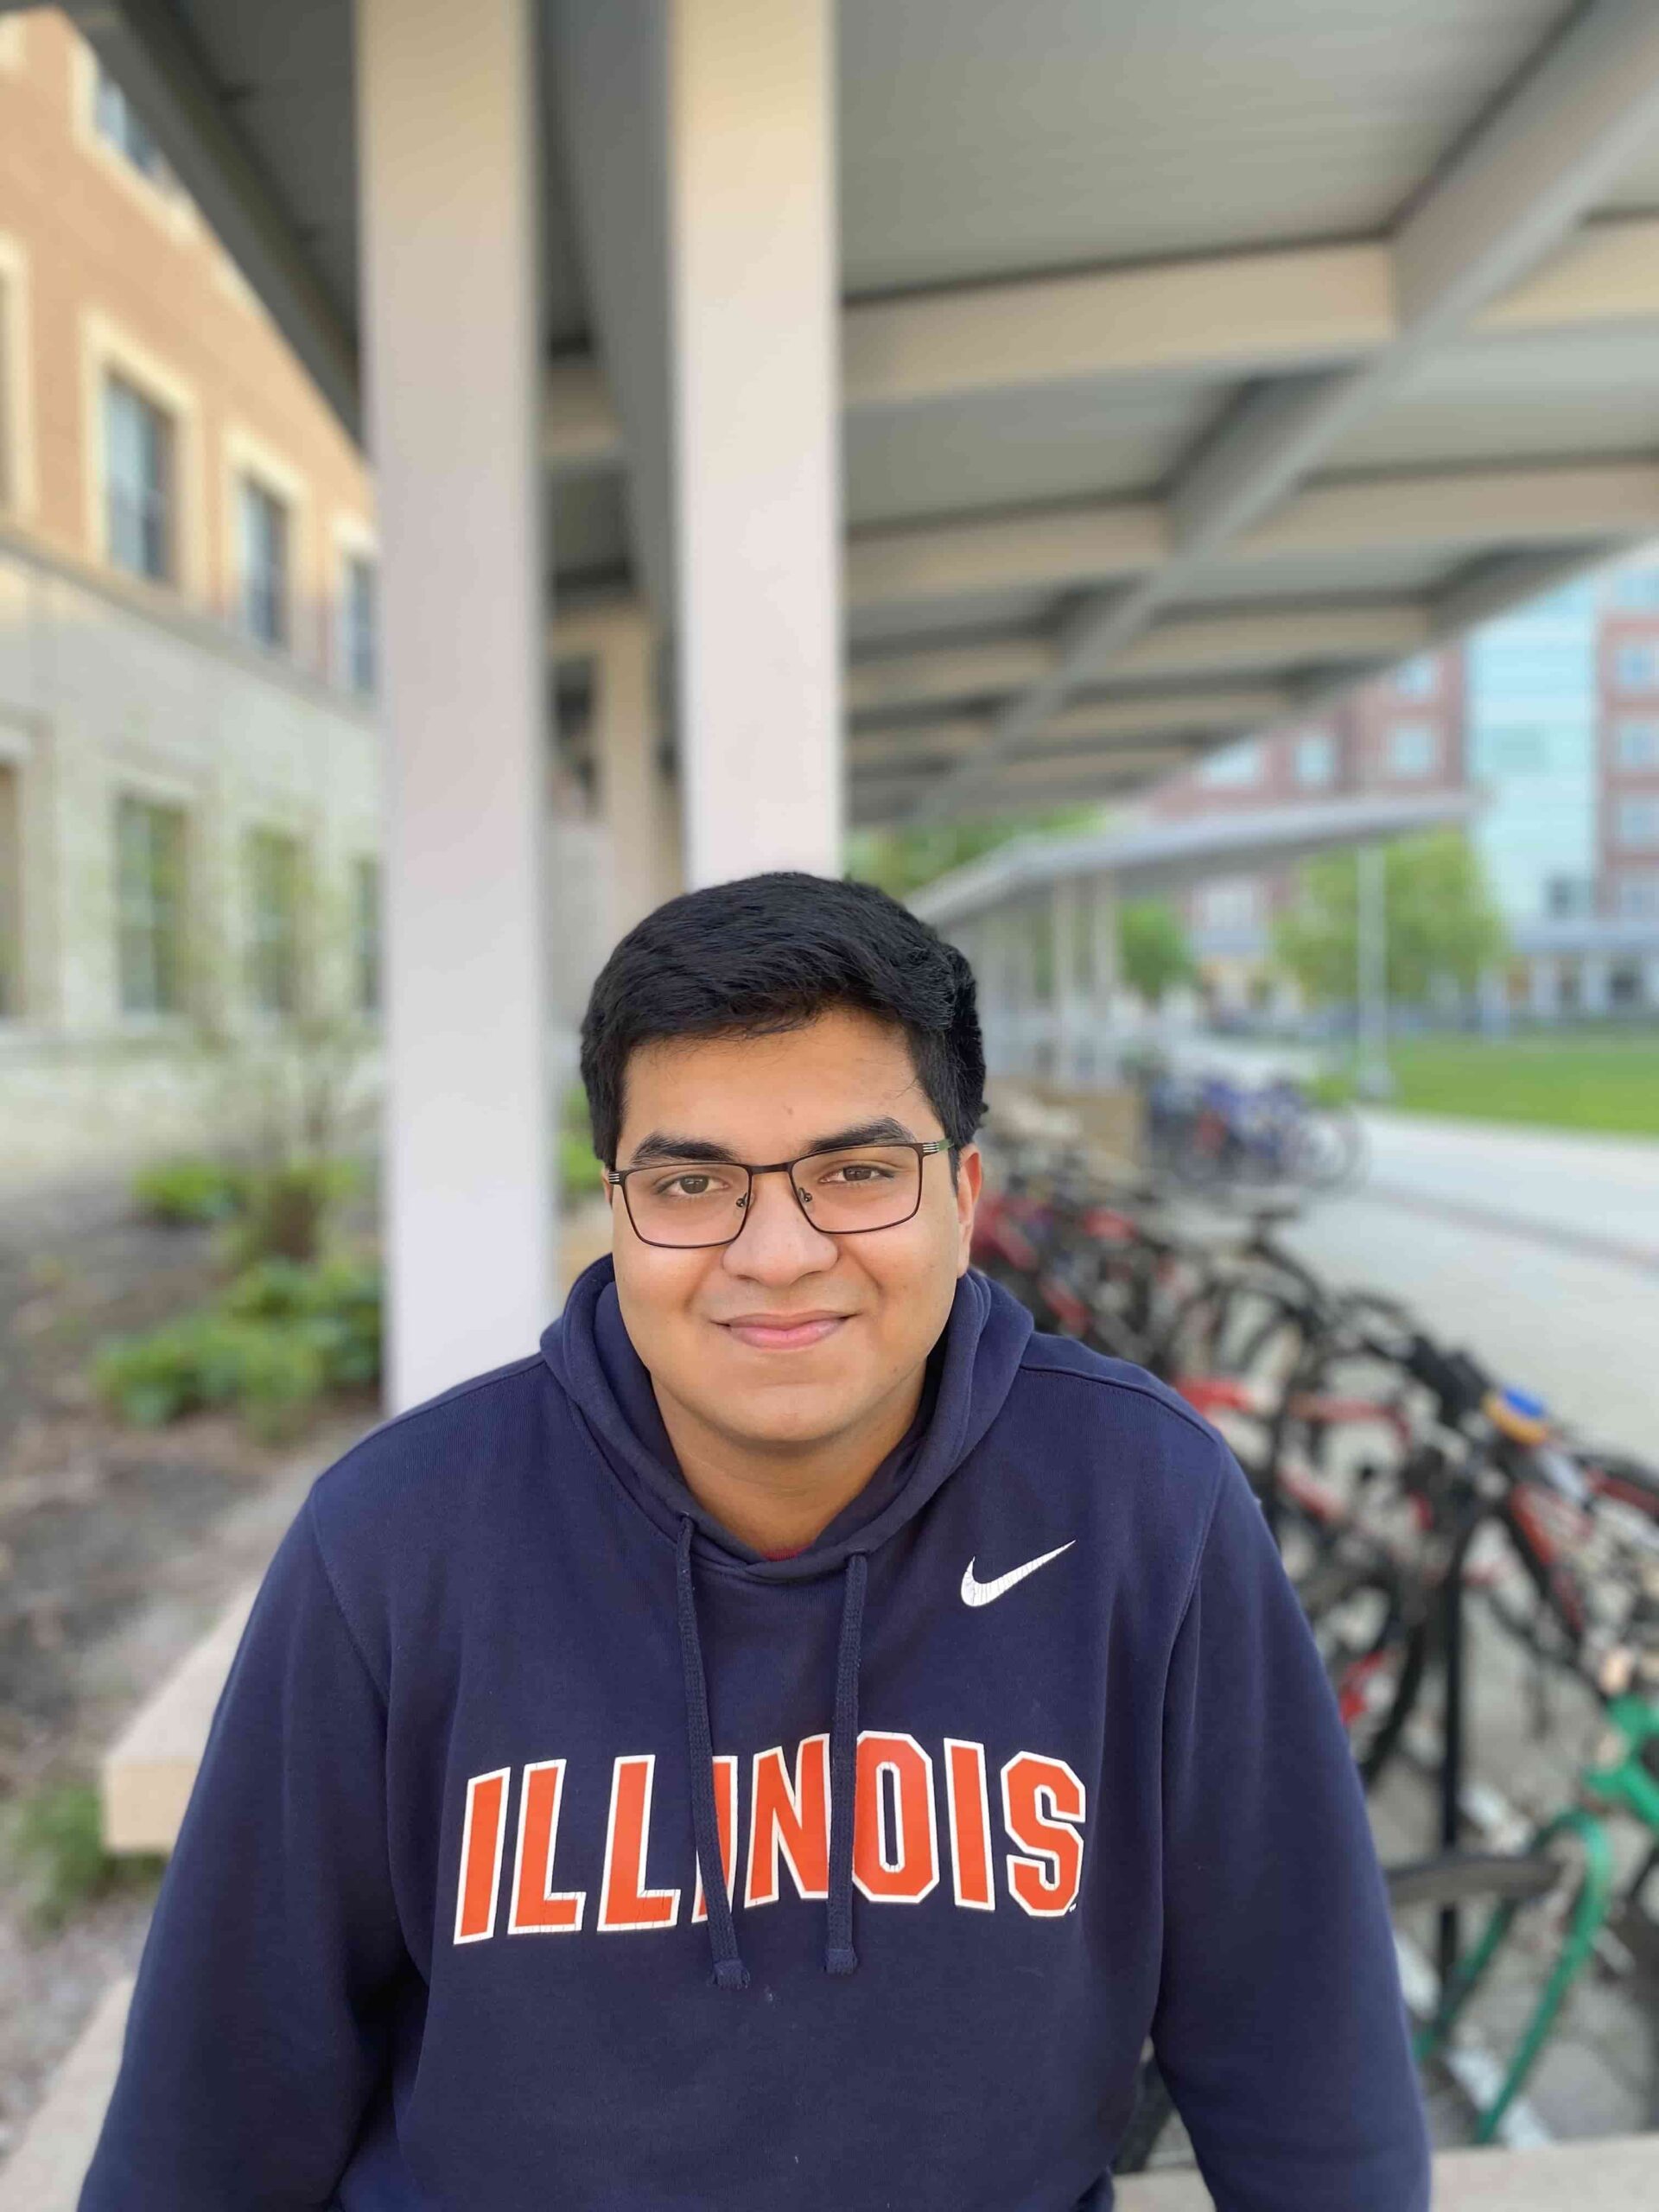 Mihir is currently pursuing electrical engineering at the University of Illinois